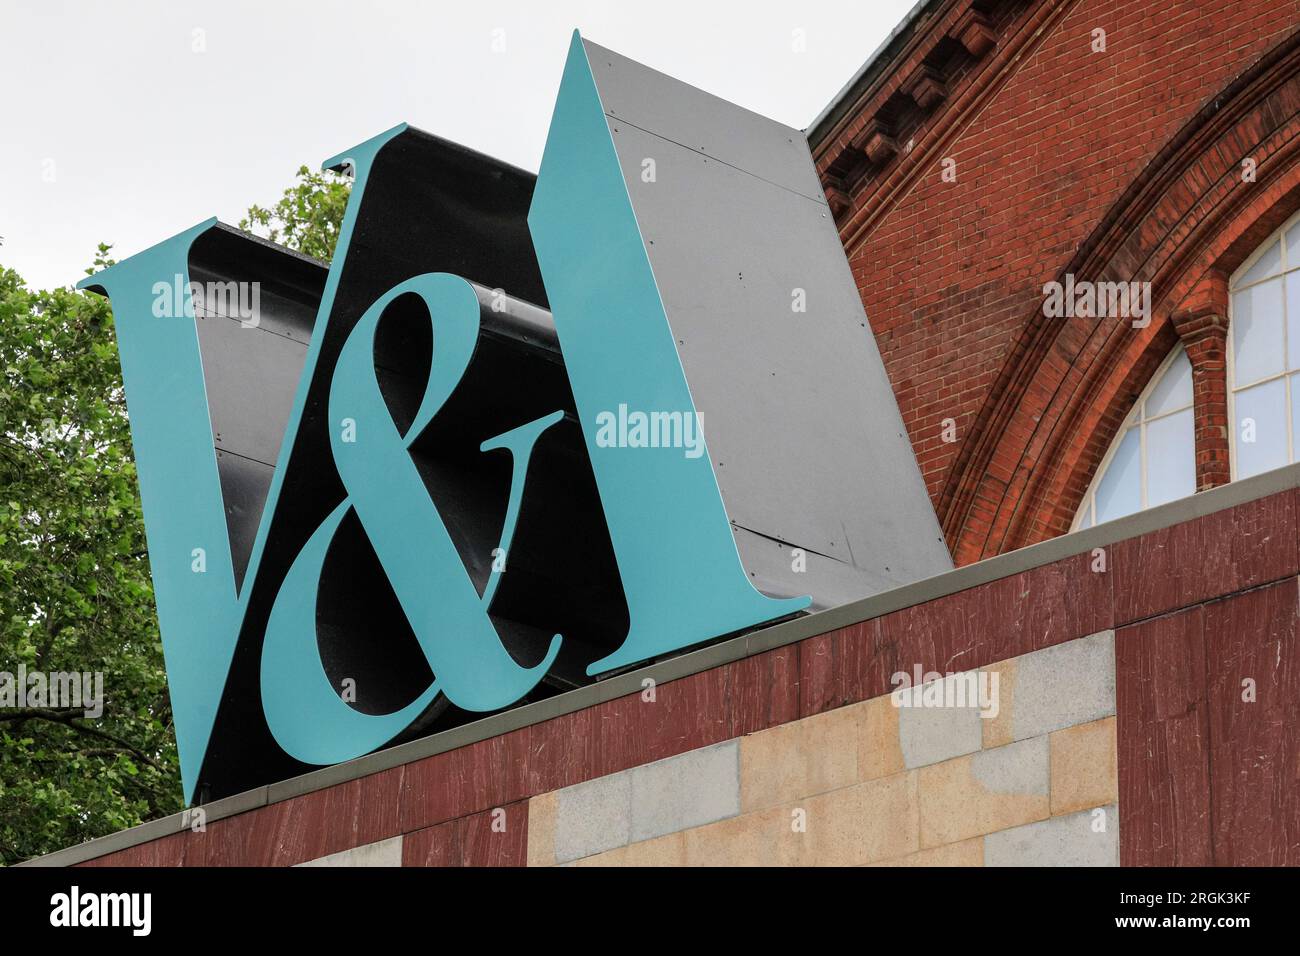 The Young V&A (Victoria and Albert Museum) sign on the outside roof top facade of the building, Bethnal Green, London Stock Photo